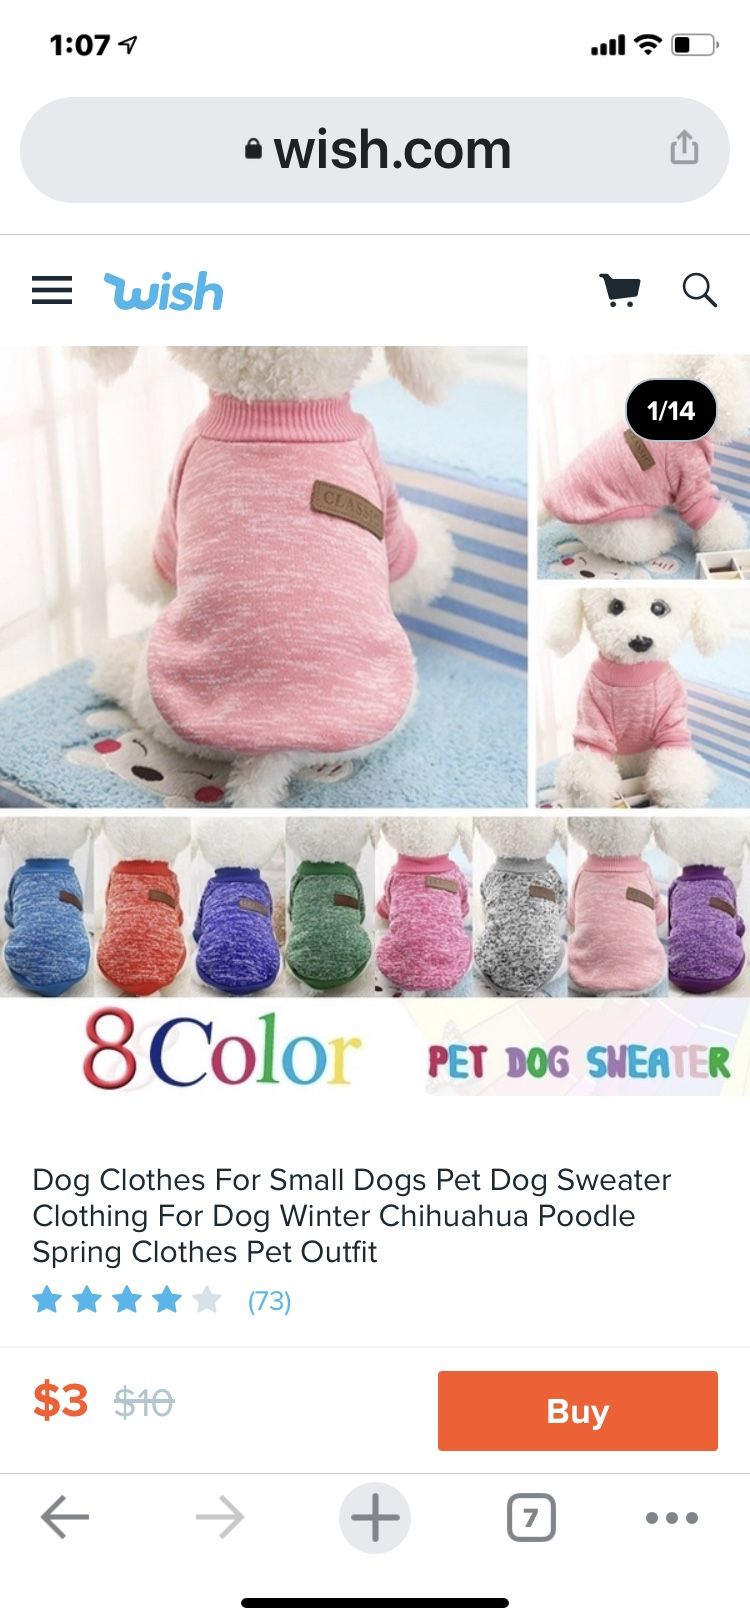 Dog Sweater In Several Colors